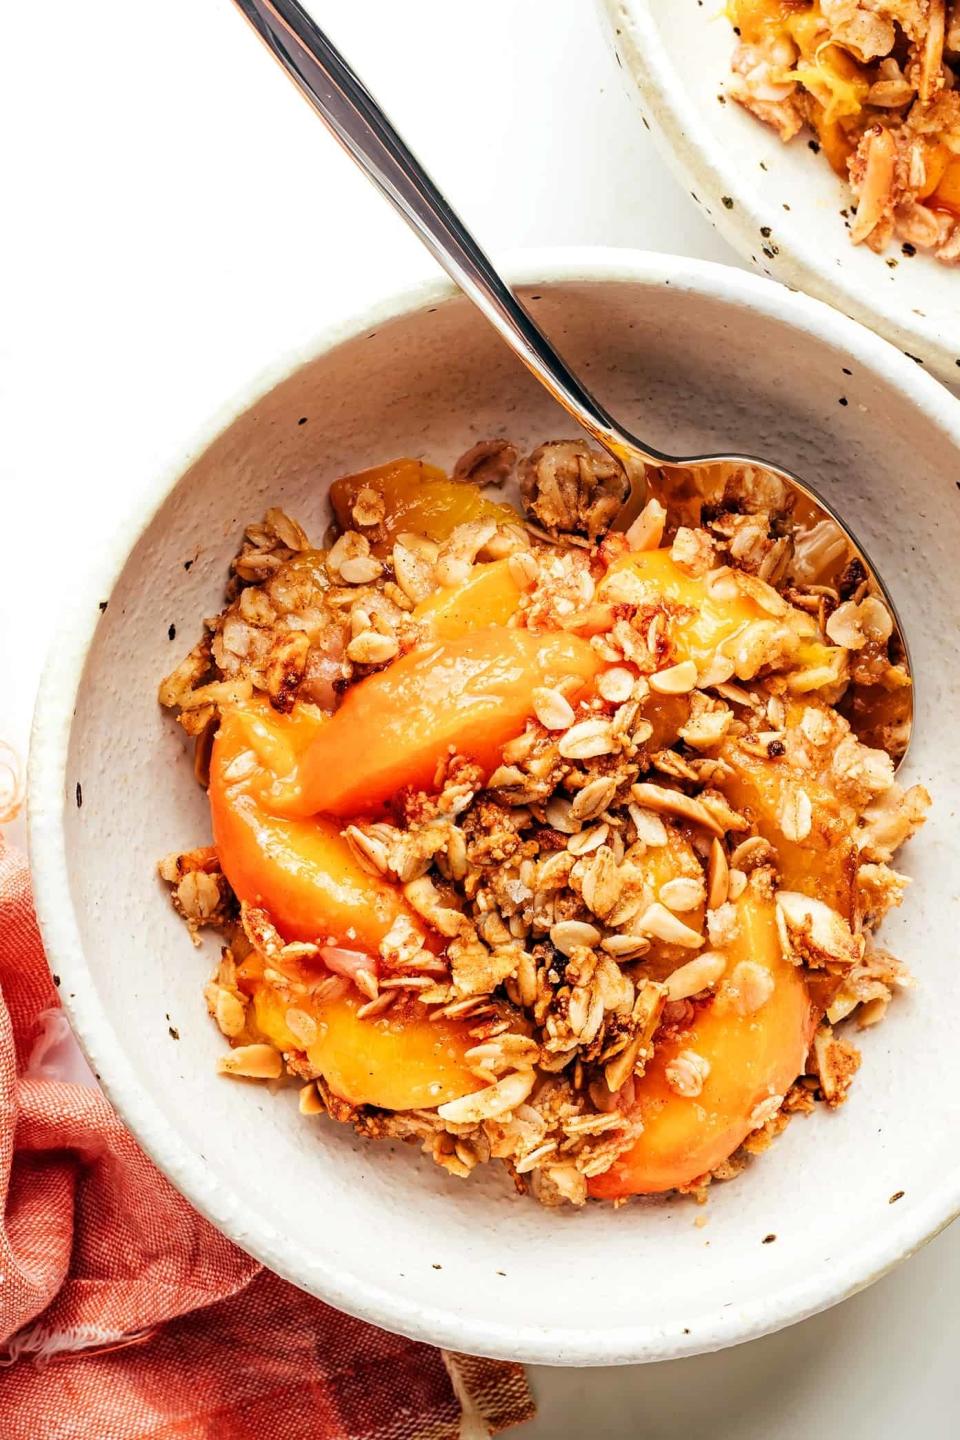 A bowl of peach crisp with a spoon, showing slices of peaches and a topping of oats and nuts. A napkin is partially visible beside the bowl